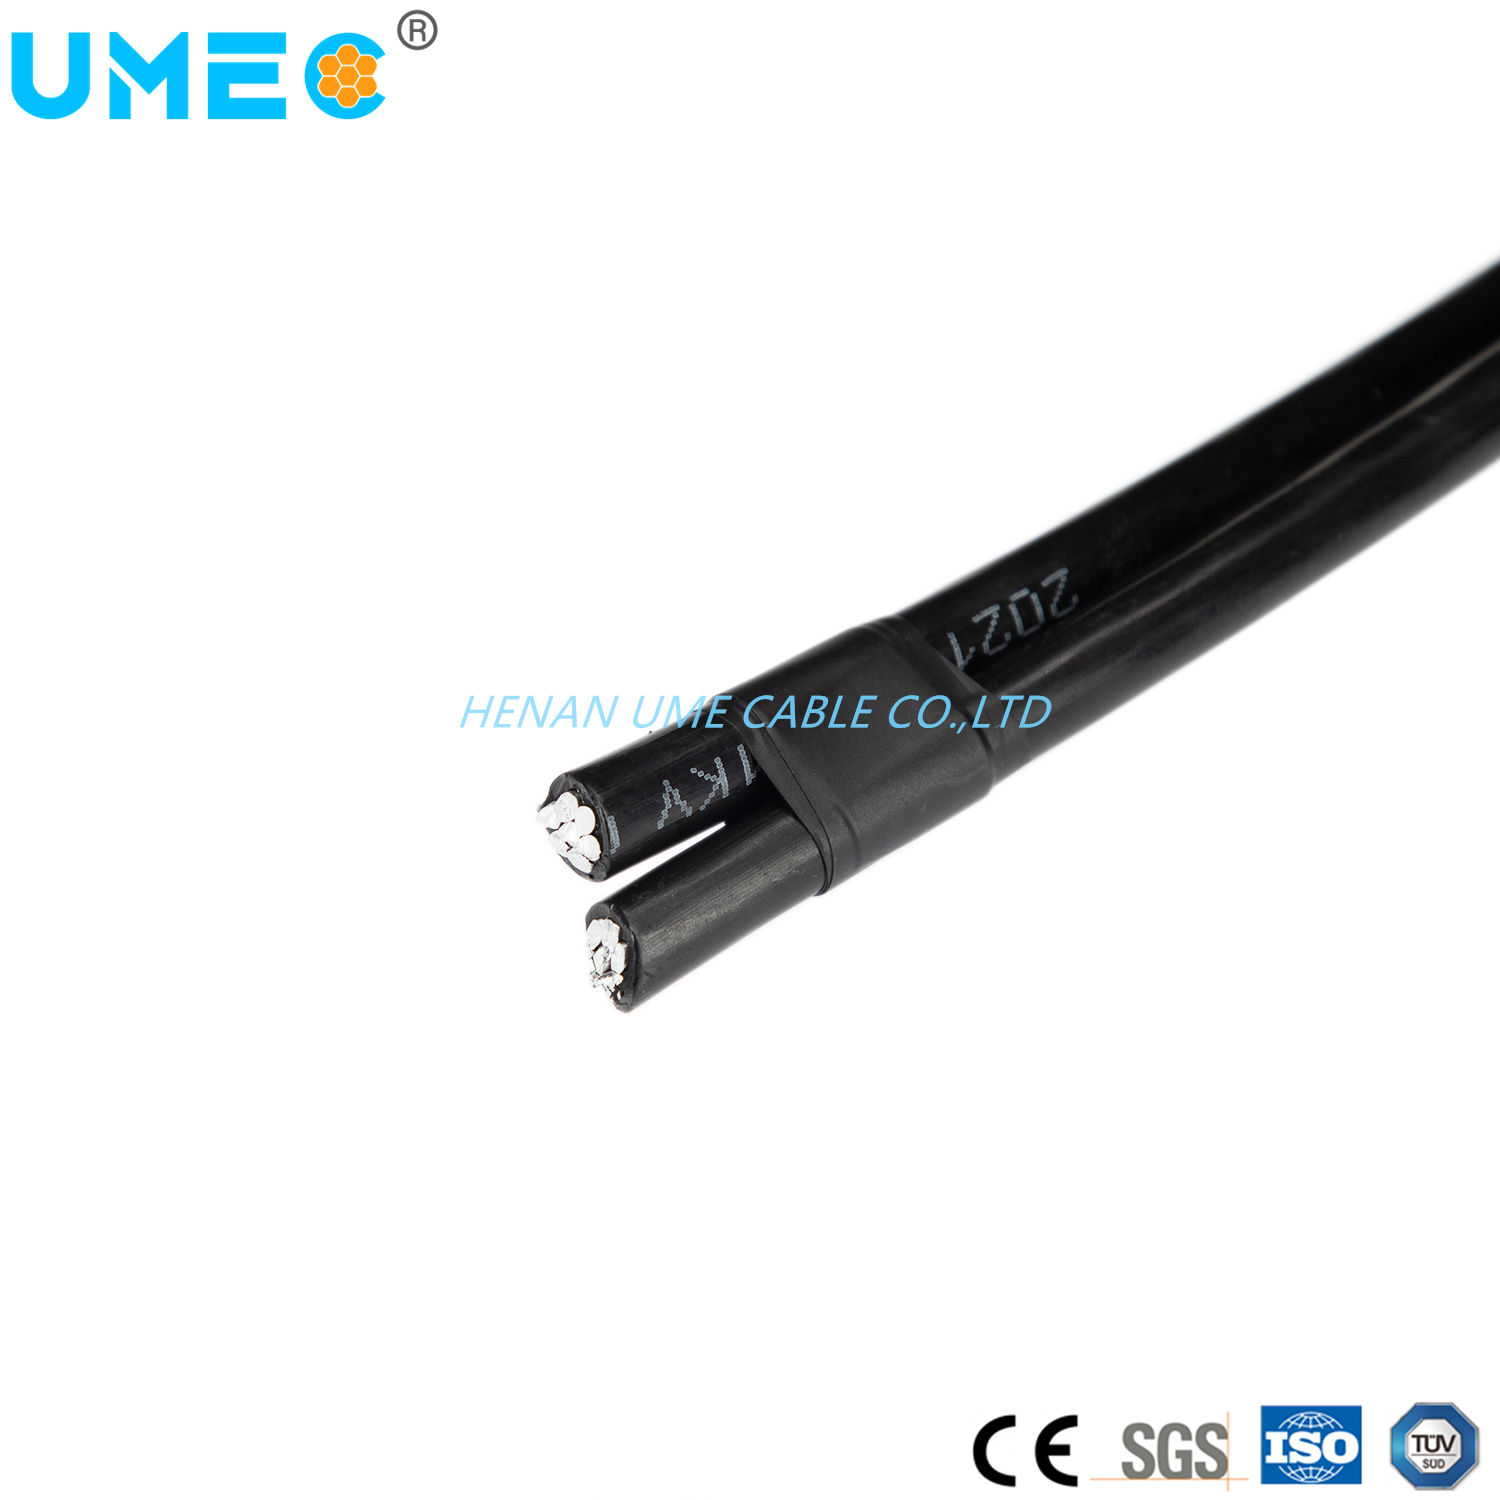 China Factory Direct Utility Overhead Caai Cable 2/3/4 Cores